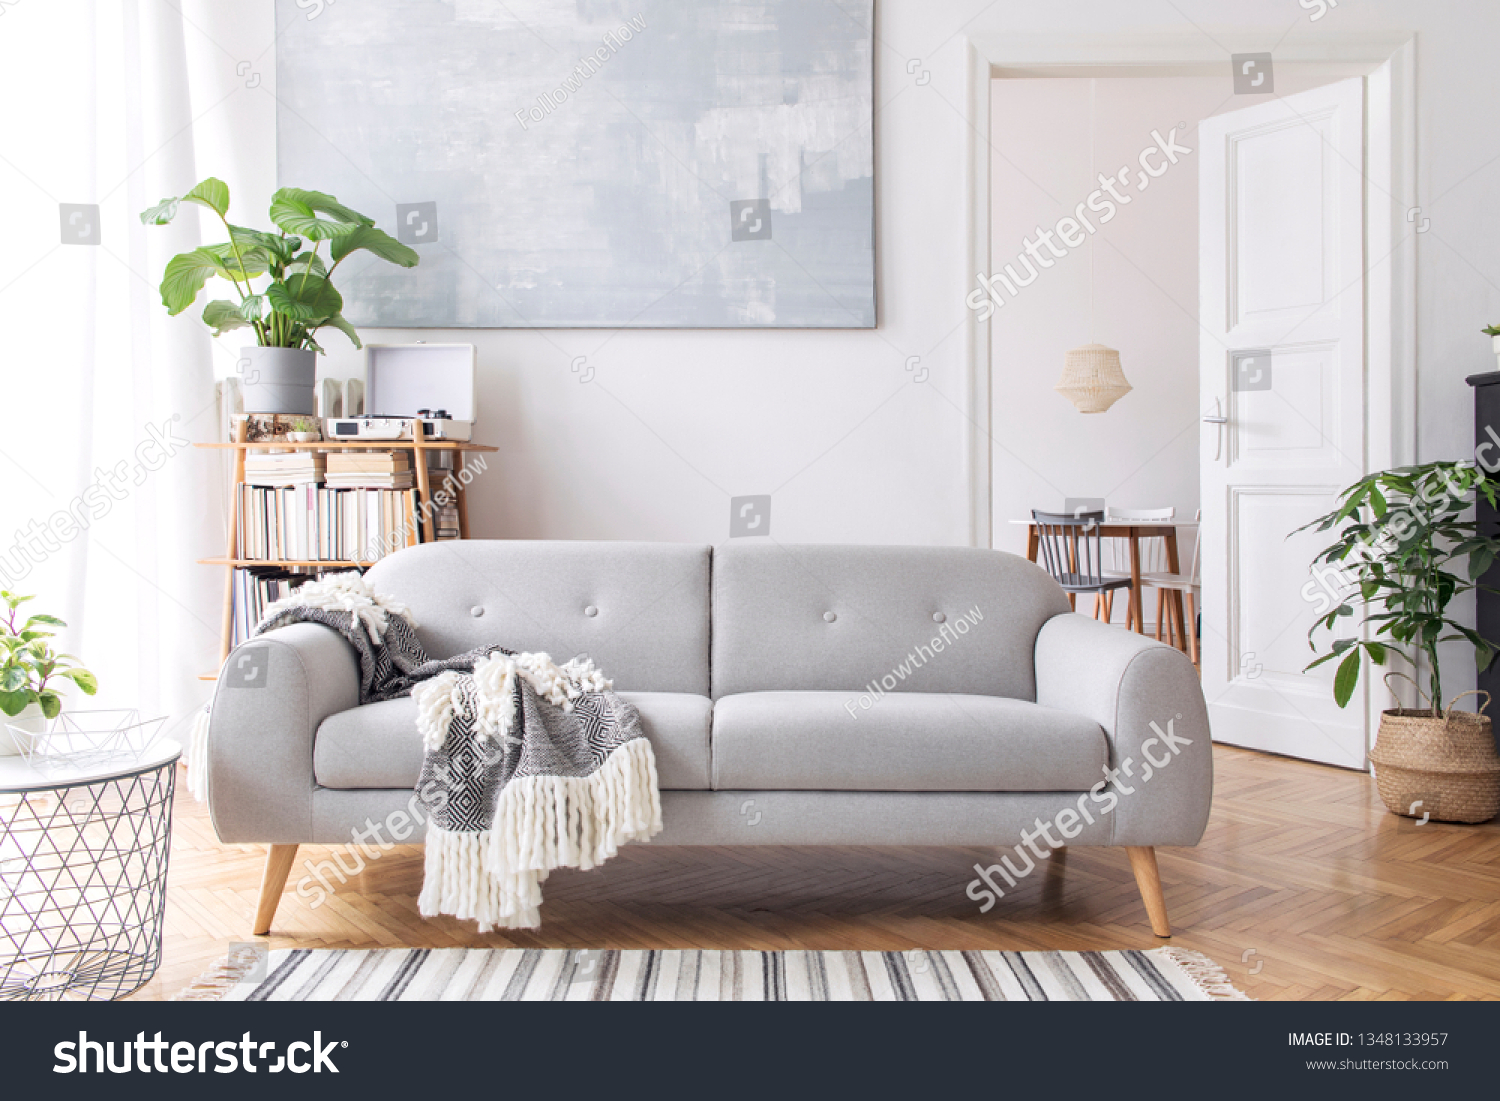 Stylish scandianvian living room with design sofa with elegant blanket, coffee table and bookstand on the white wall. Brown wooden parquet. Concept of minimalistic decor interior with piano. Mock up. #1348133957